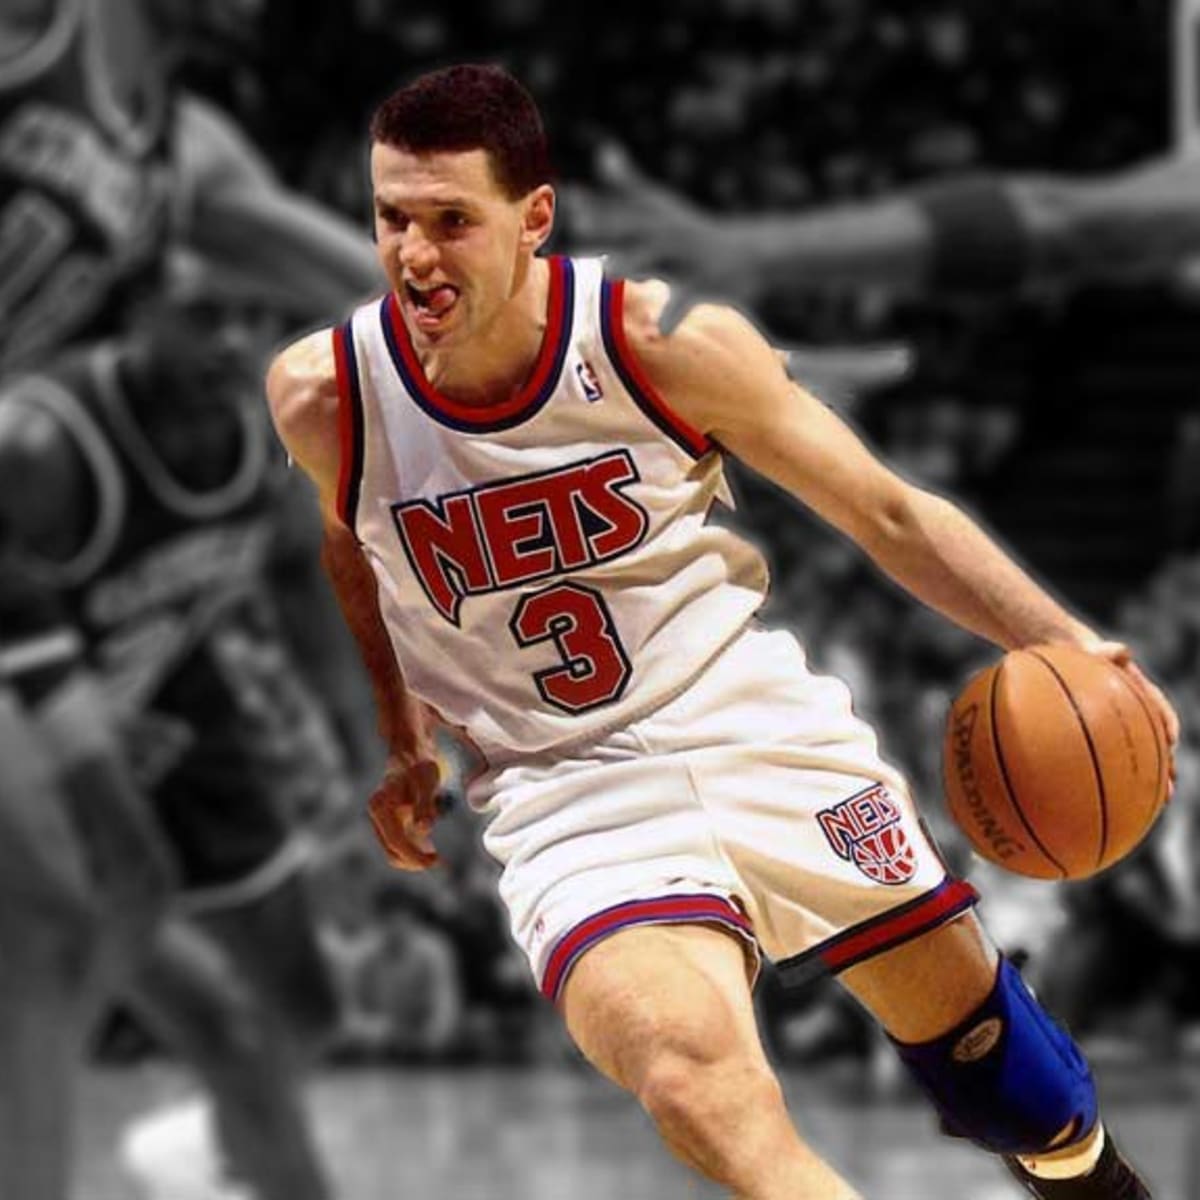 THE LATE GREAT DRAZEN PETROVIC ONCE scored 112 points in a single game -  Basketball Network - Your daily dose of basketball